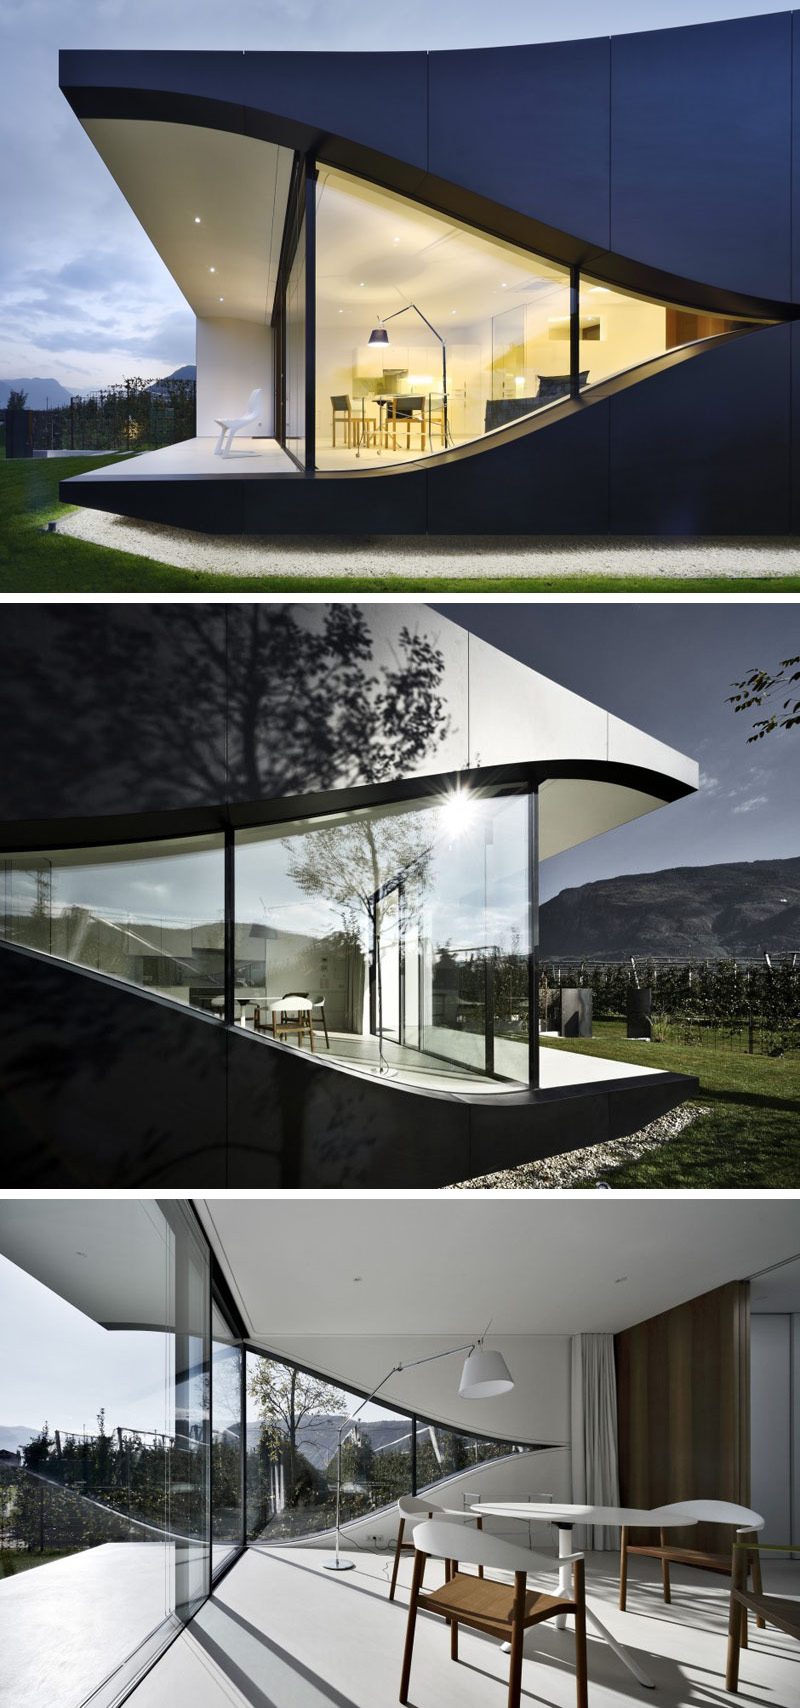 Large and curvaceous, the windows of this modern home add a unique design element and provide a stunning view of an apple orchard. 